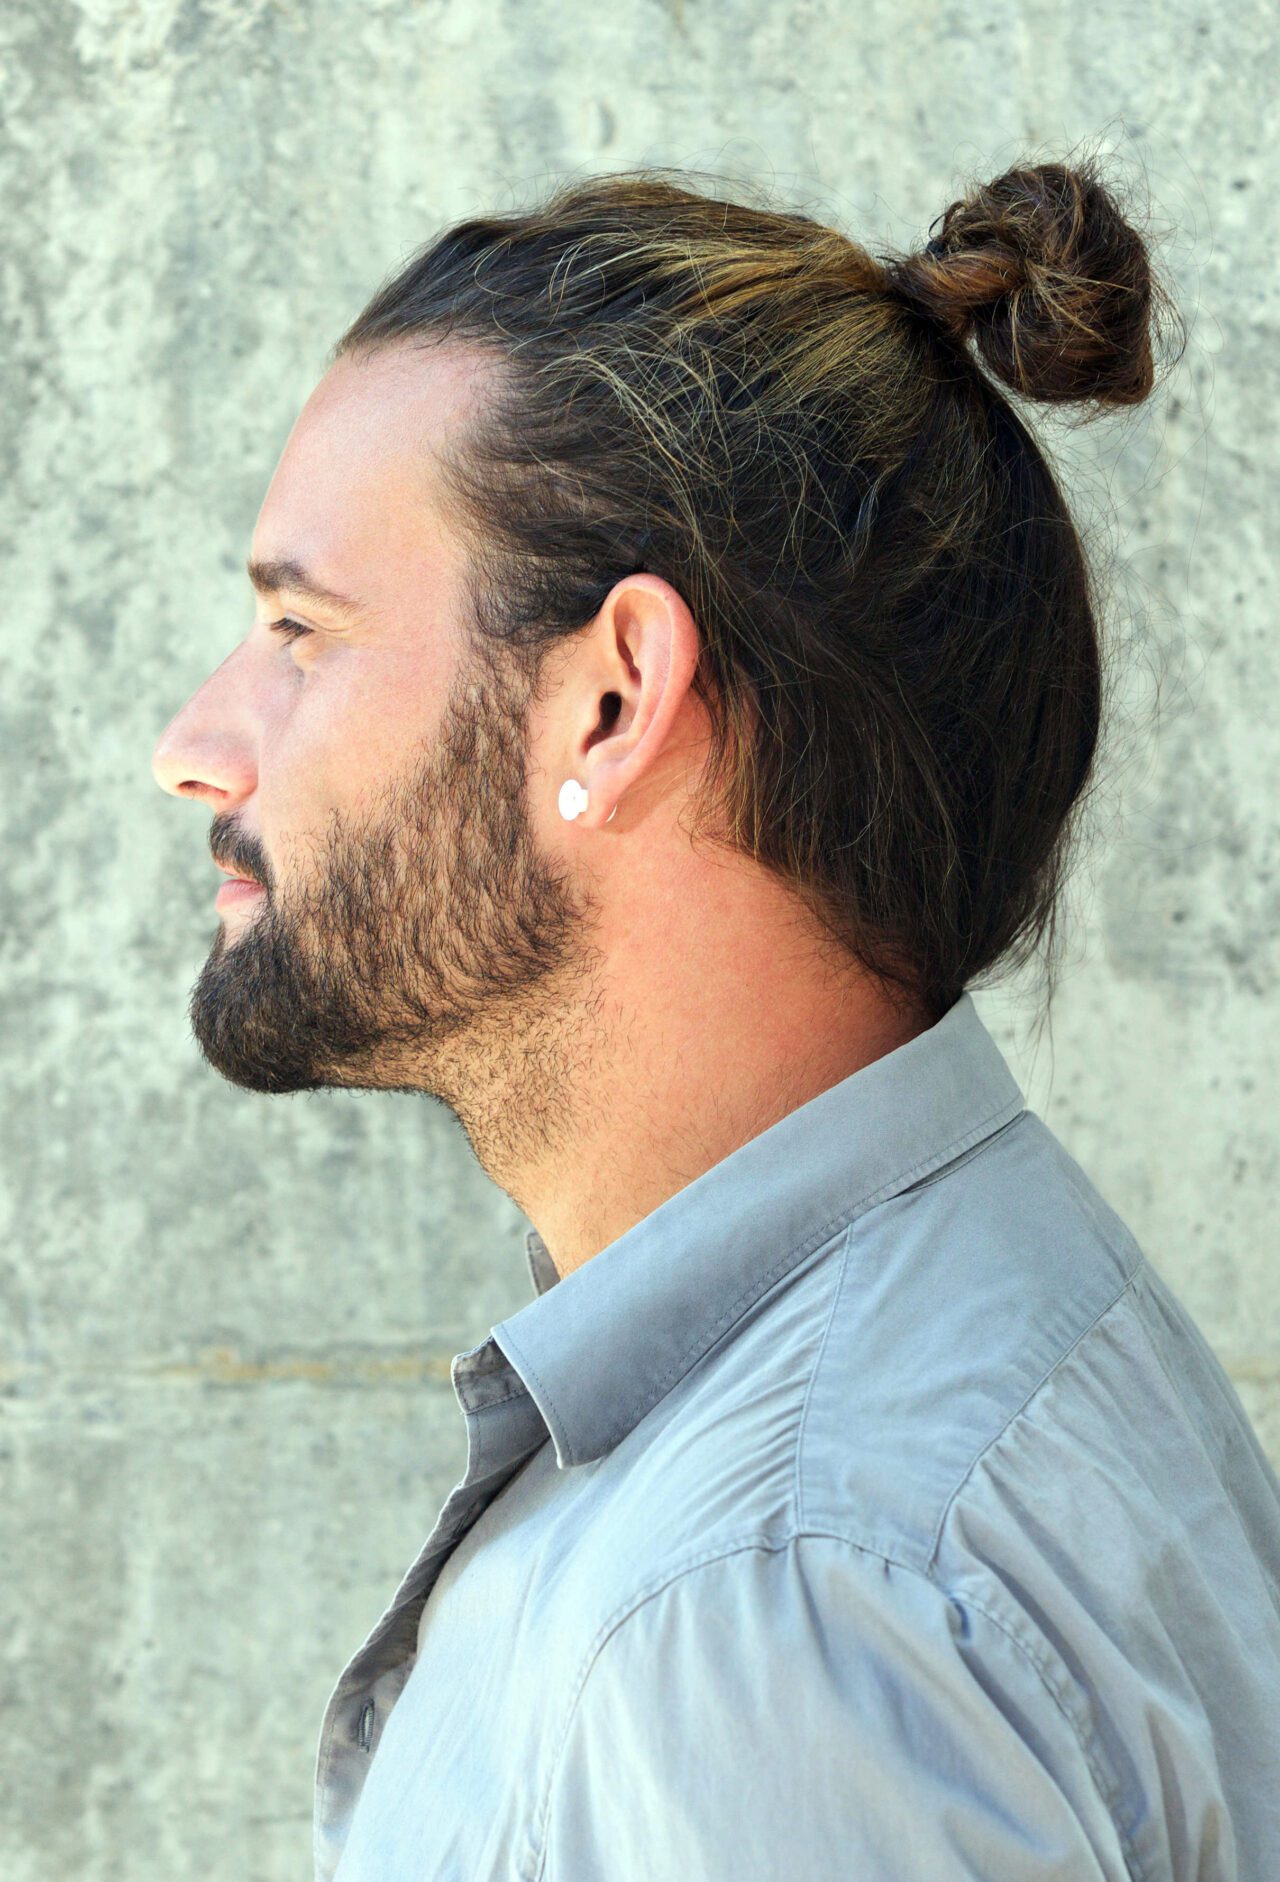 40 Types Of Man Bun Hairstyles Gallery How To Haircut Inspiration 6436